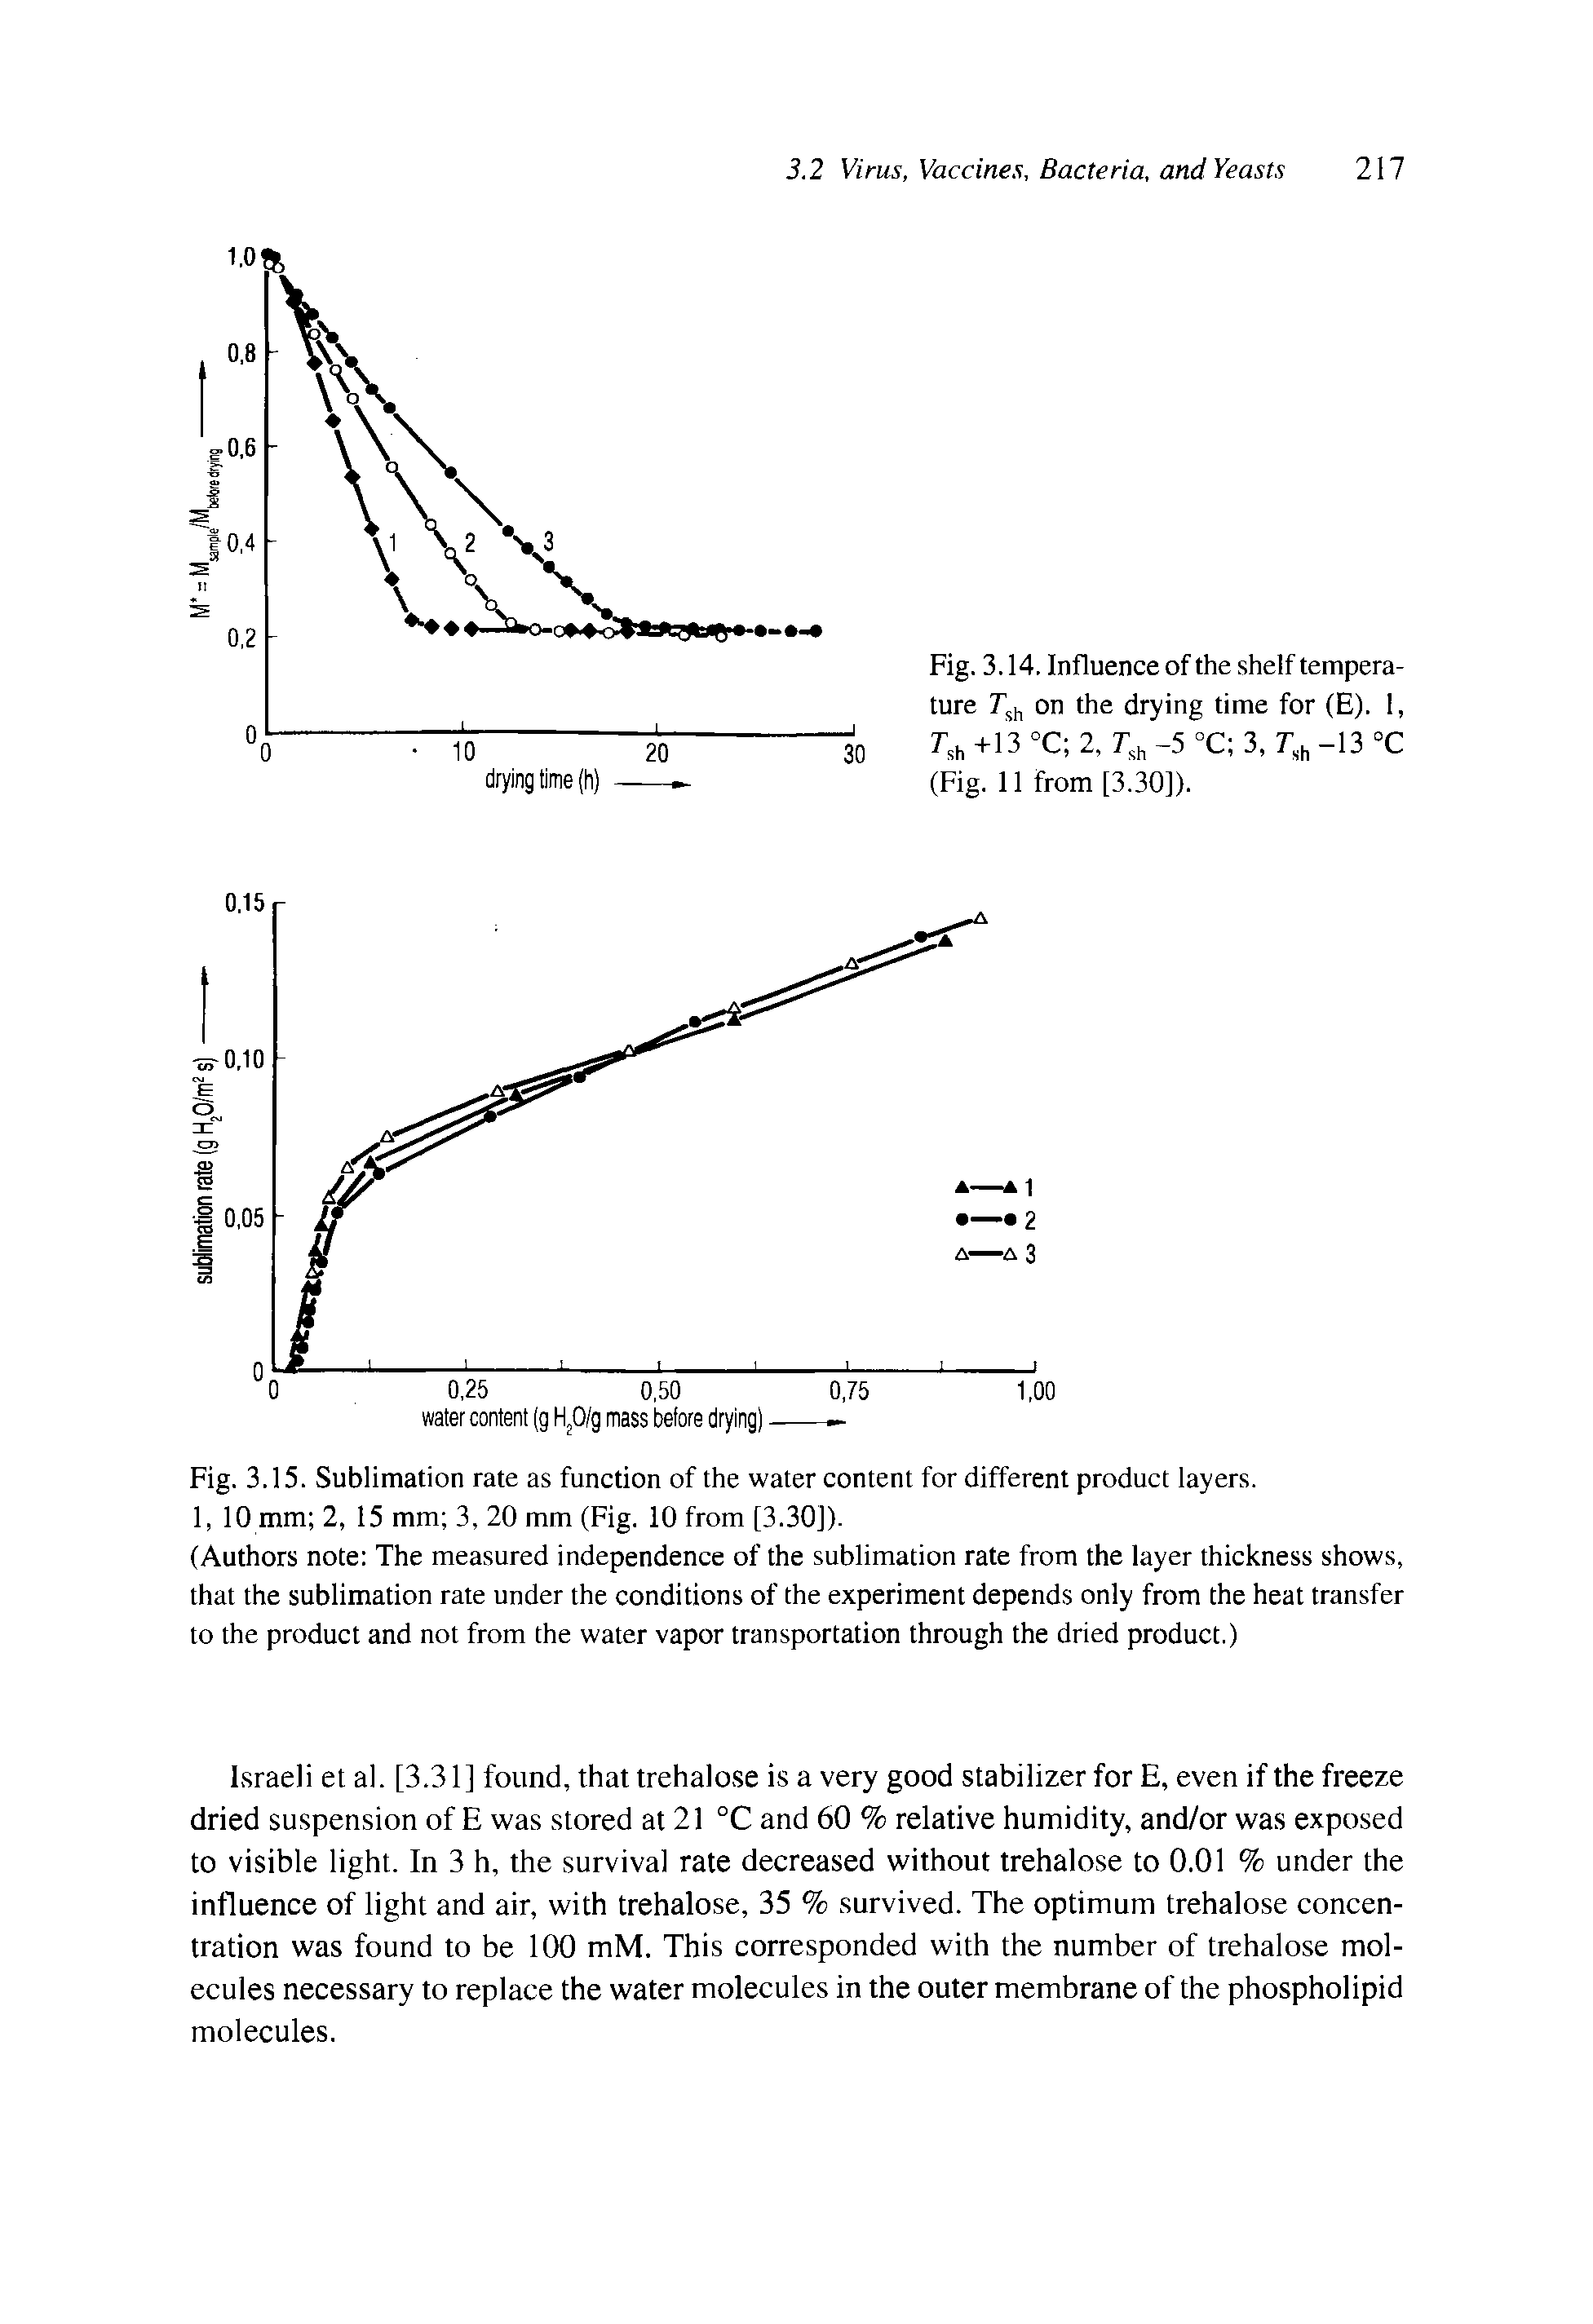 Fig. 3.15. Sublimation rate as function of the water content for different product layers.